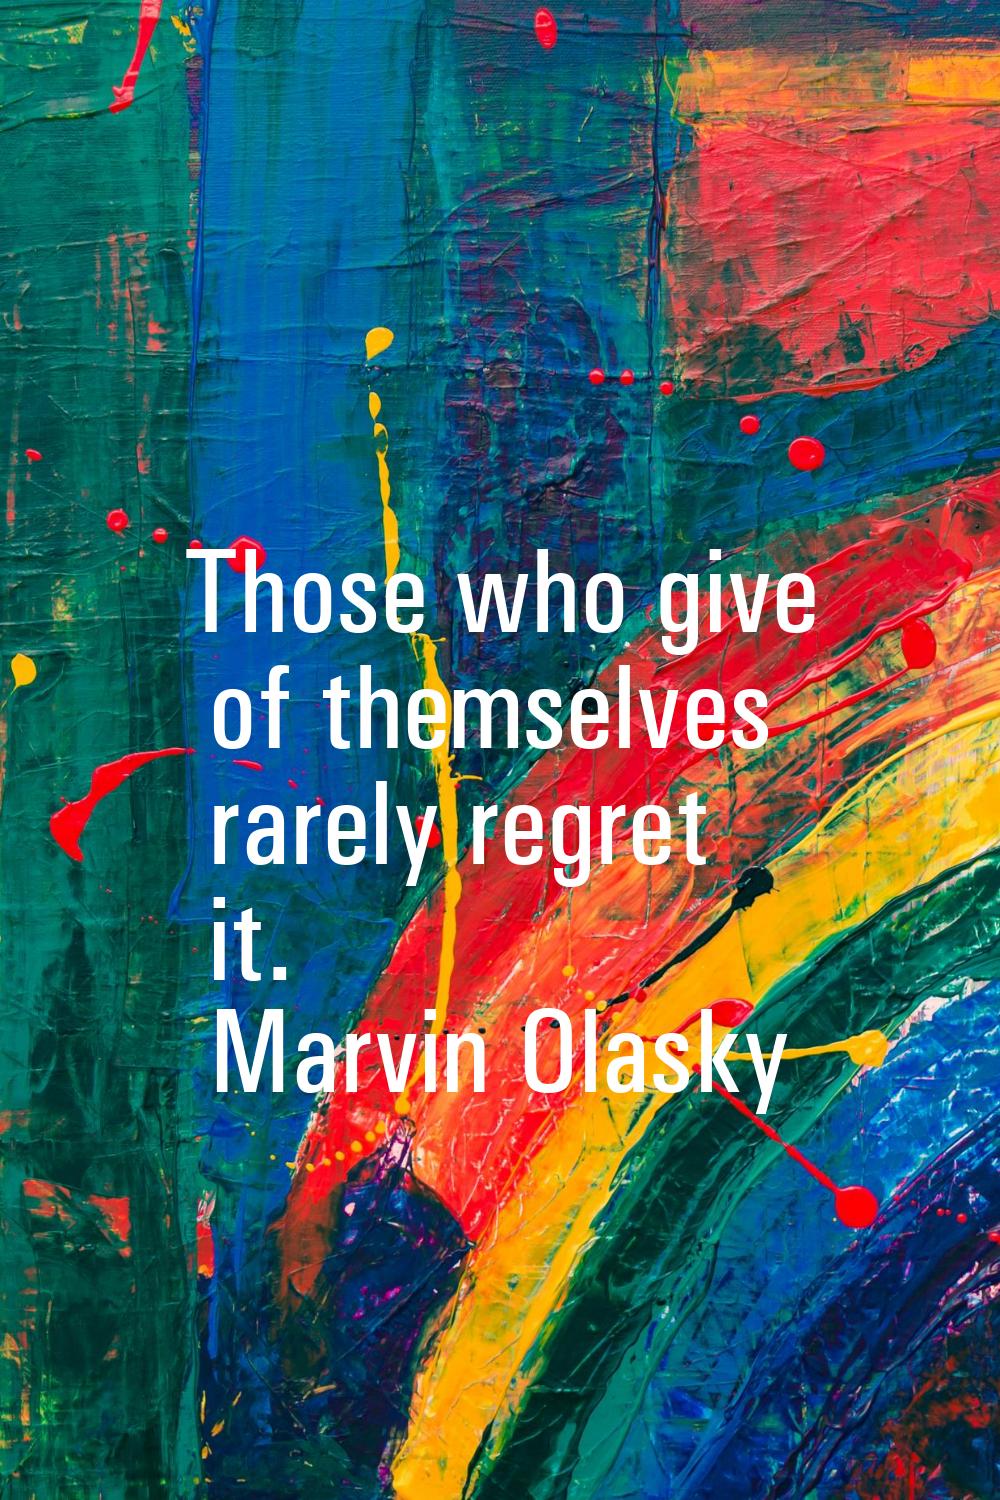 Those who give of themselves rarely regret it.